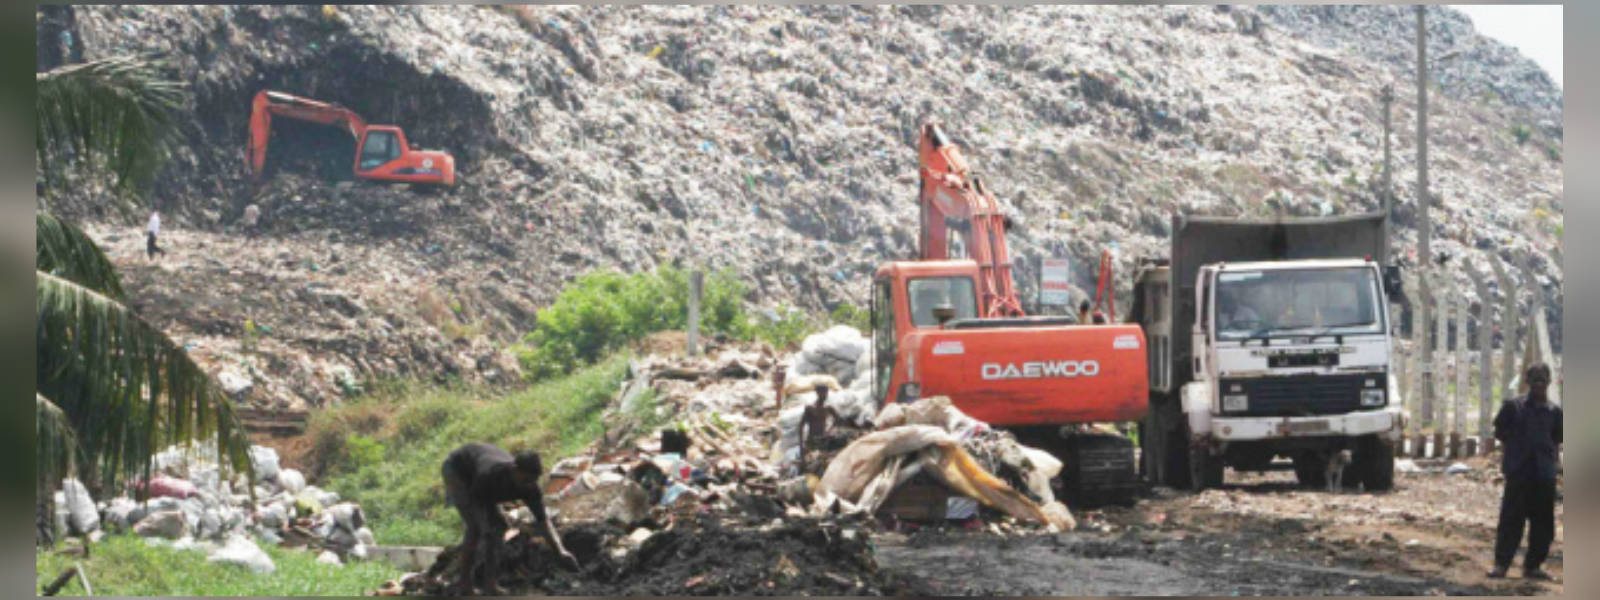 Removal of CMC garbage hampered due to rain